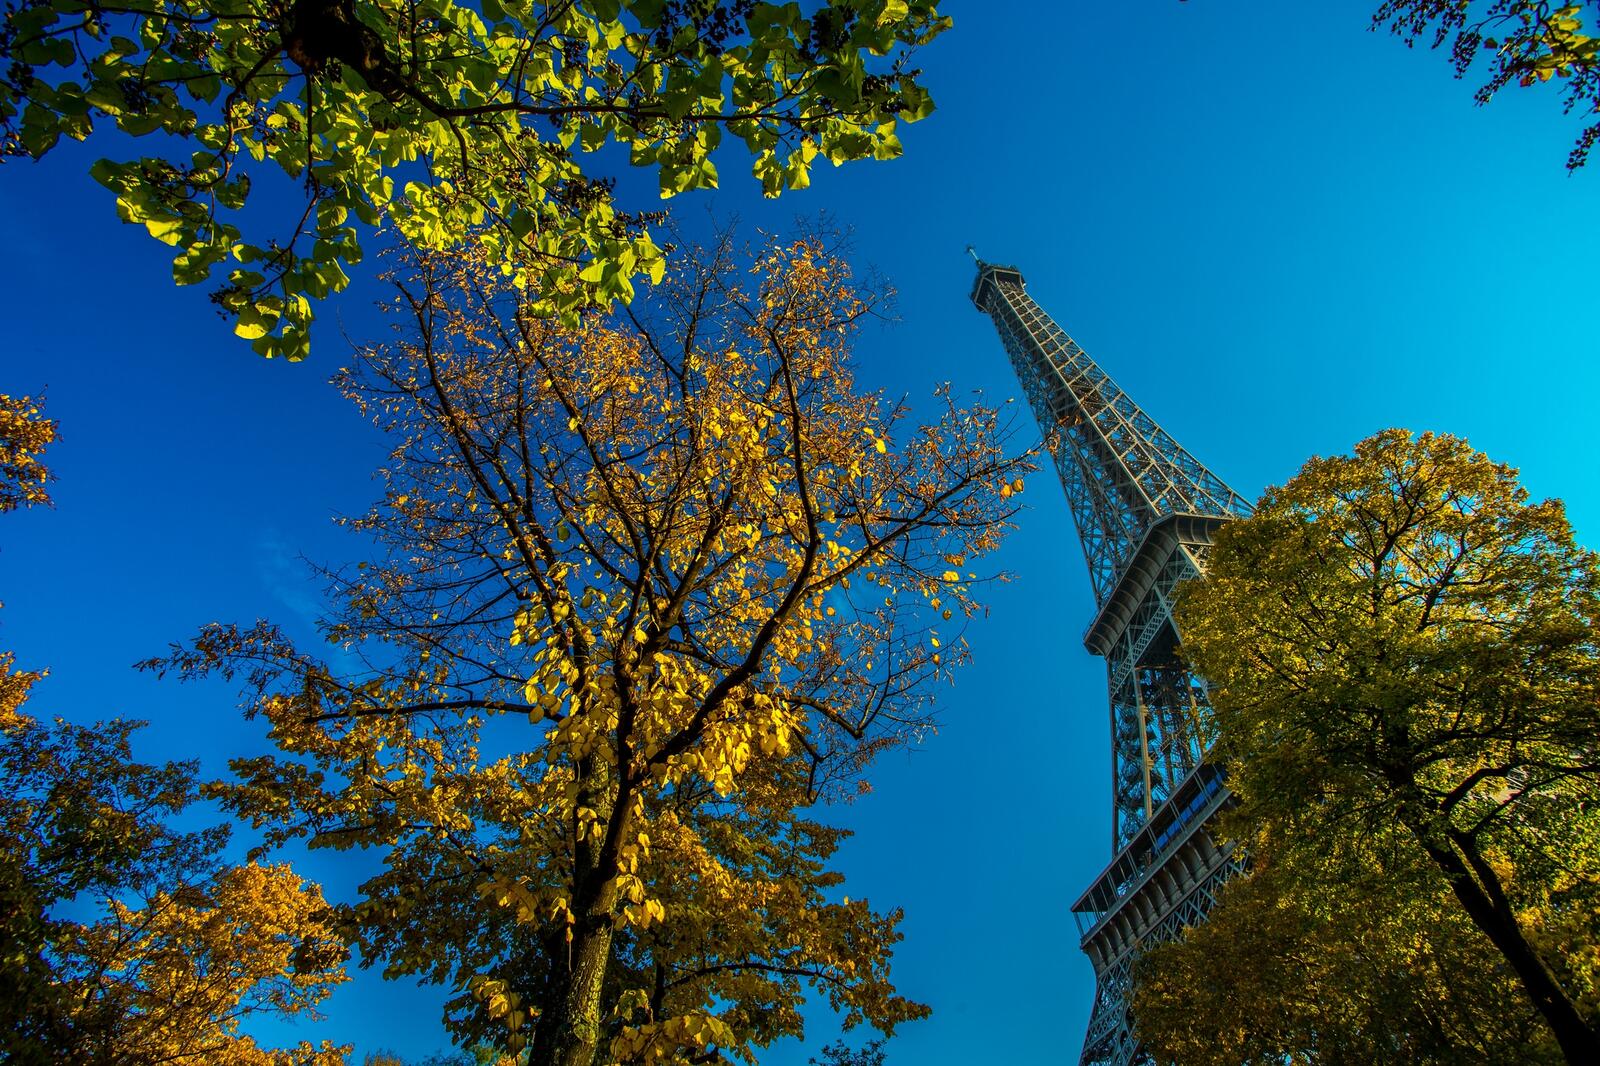 Free photo The Eiffel Tower can be seen through the treetops